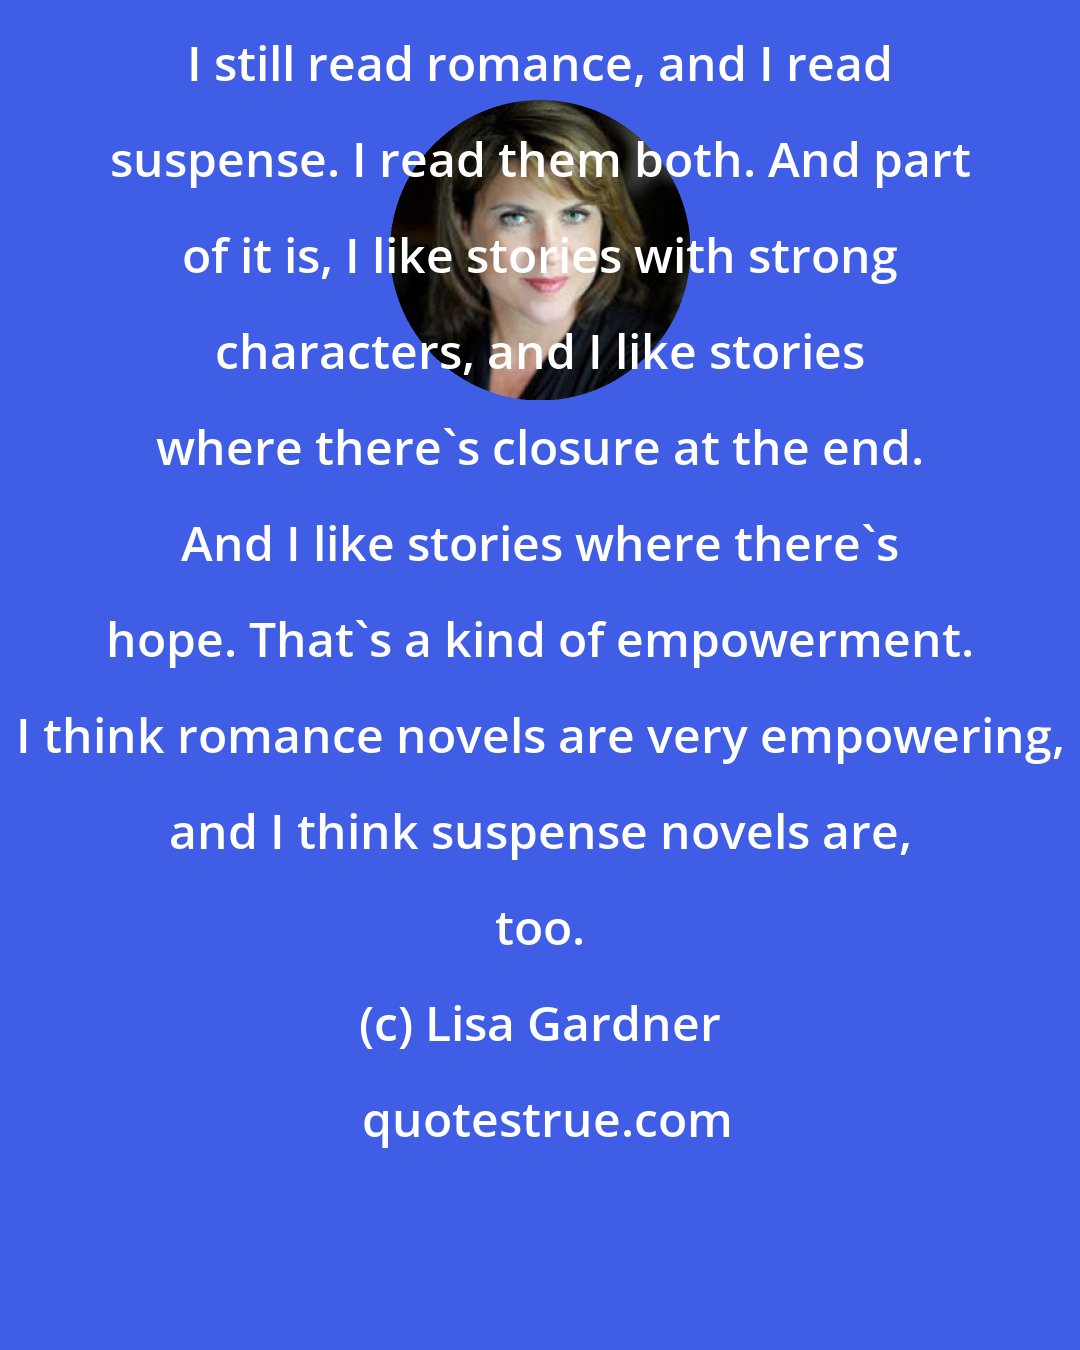 Lisa Gardner: I still read romance, and I read suspense. I read them both. And part of it is, I like stories with strong characters, and I like stories where there's closure at the end. And I like stories where there's hope. That's a kind of empowerment. I think romance novels are very empowering, and I think suspense novels are, too.